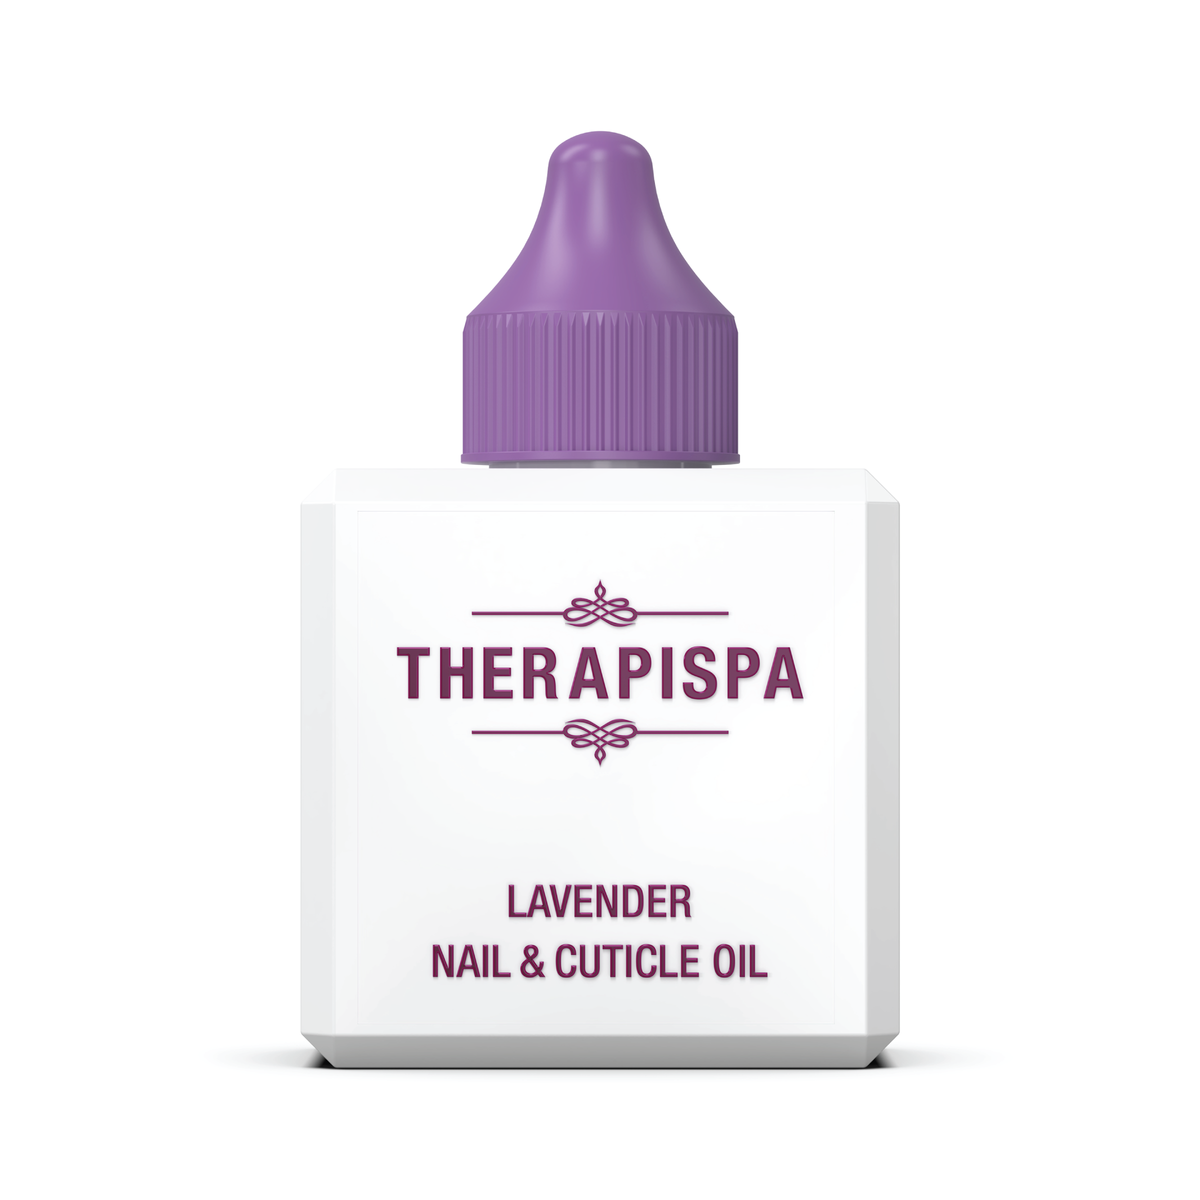 Nail and Cuticle Oil / Lavender